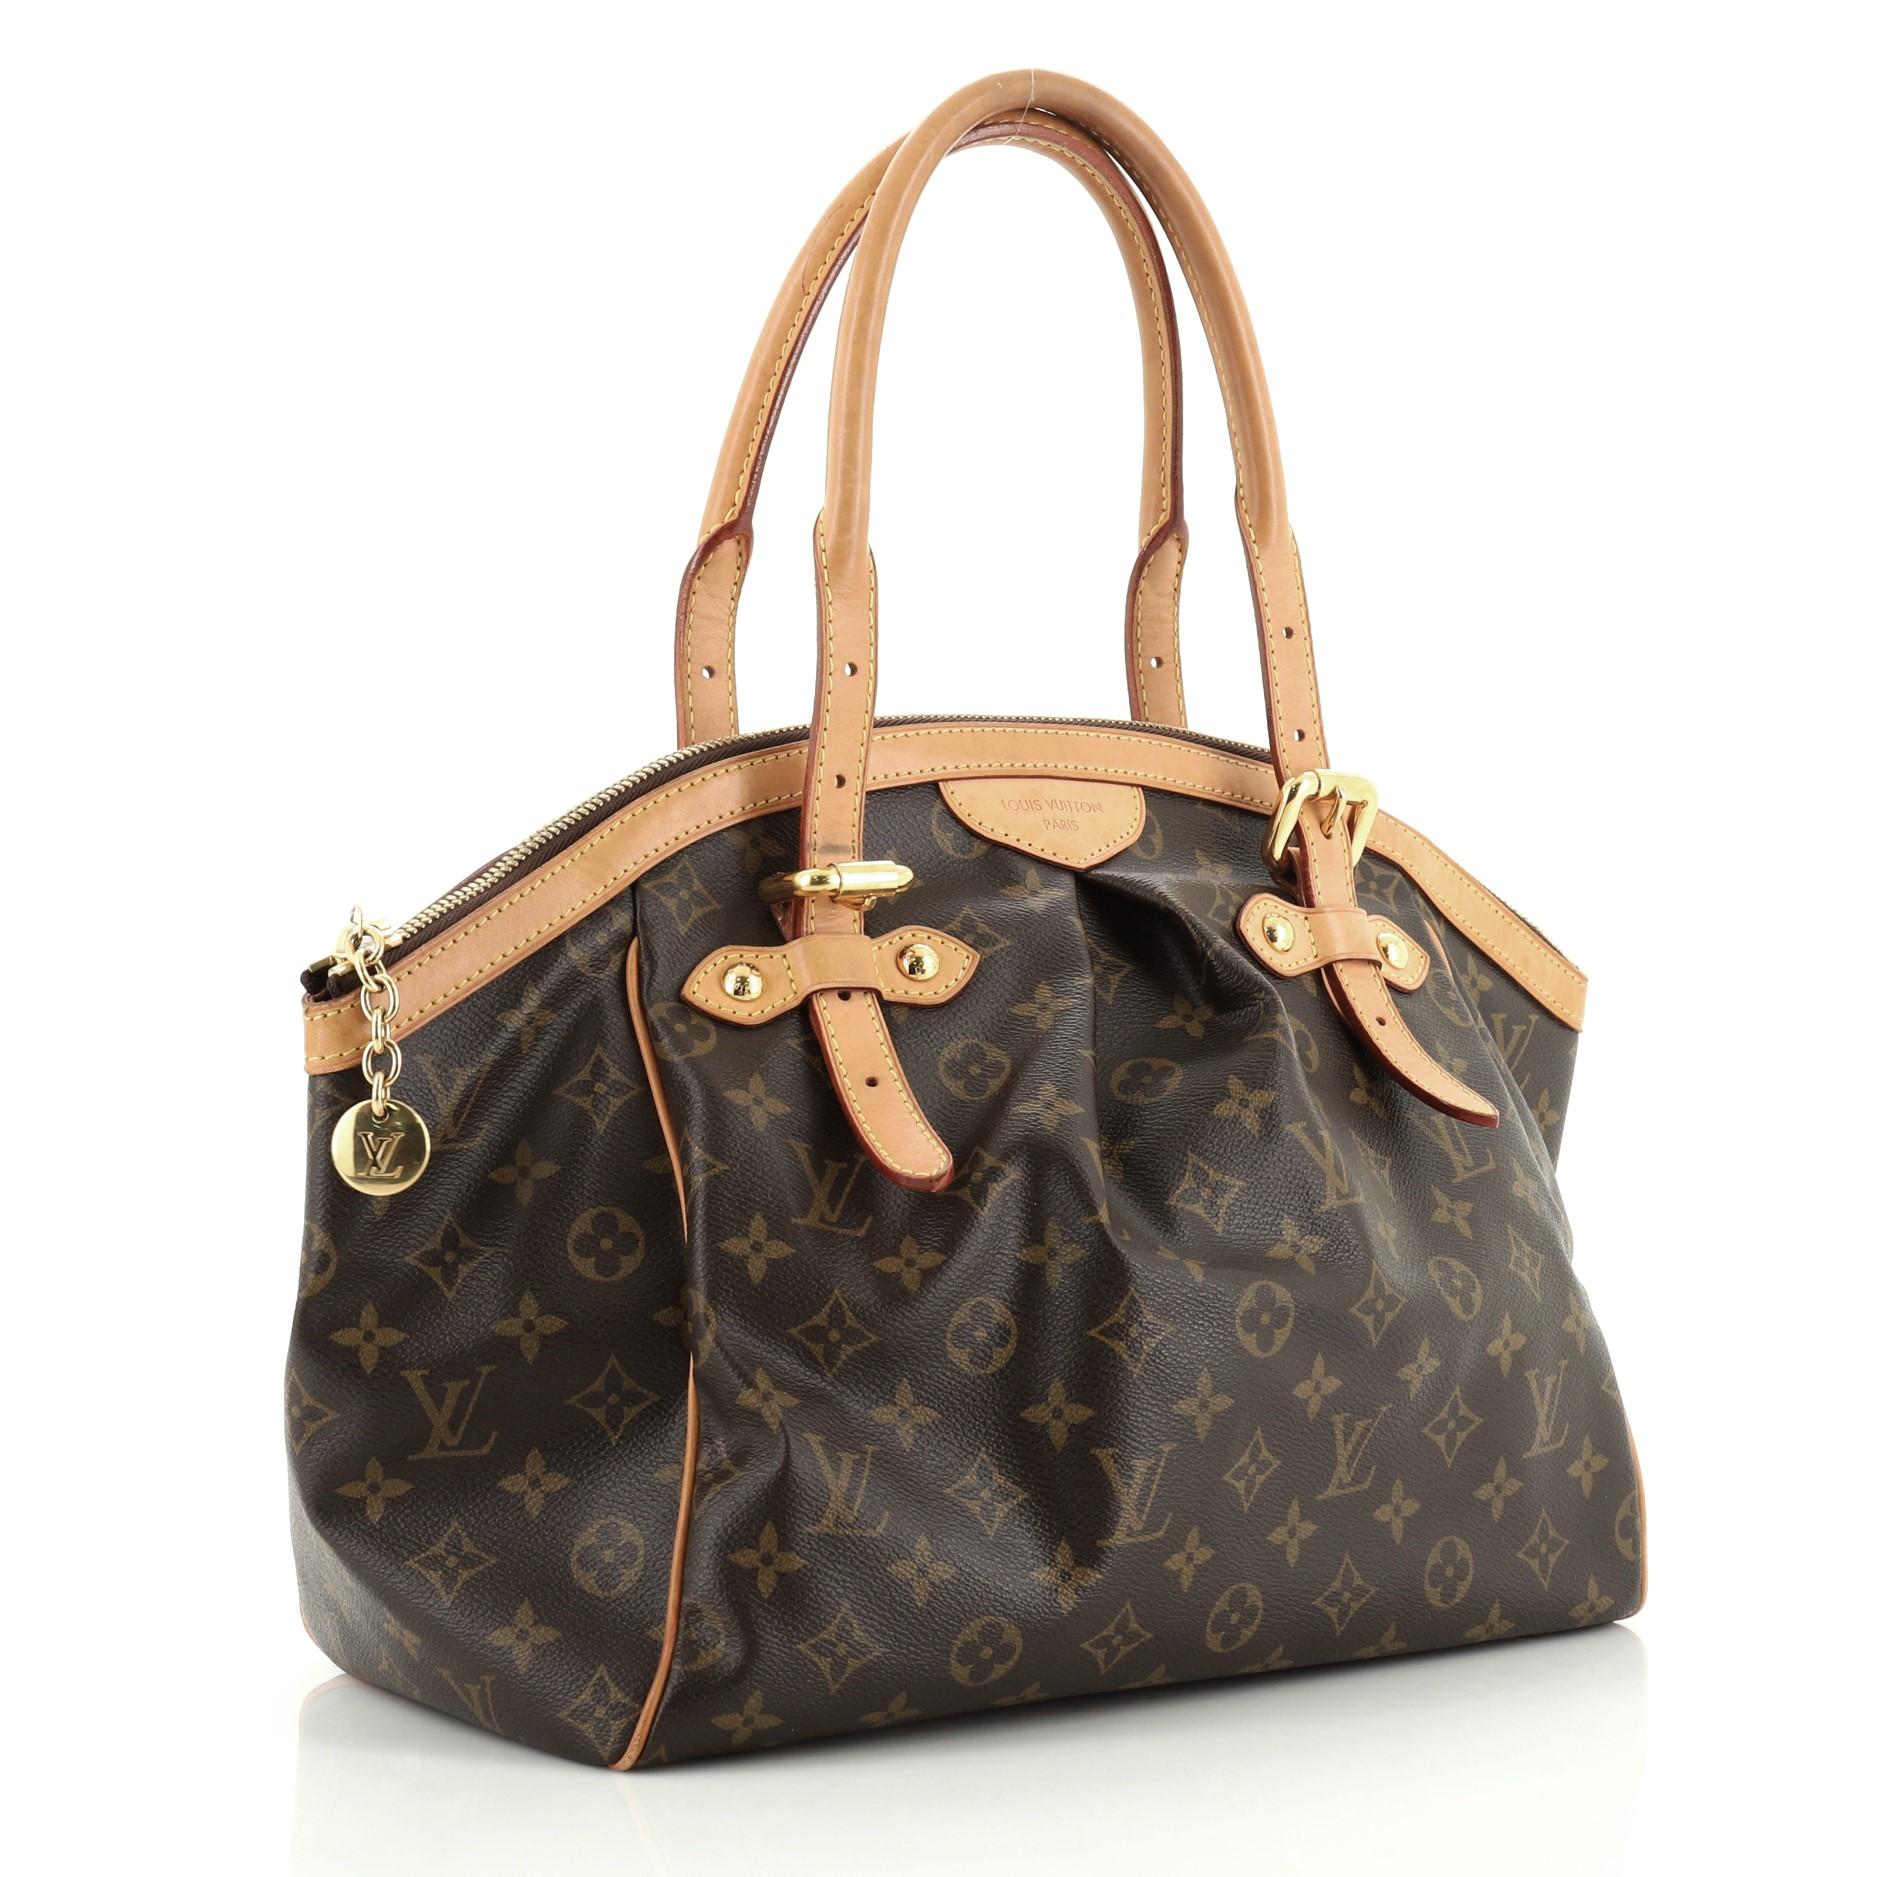 This Louis Vuitton Tivoli Handbag Monogram Canvas GM, crafted from brown monogram coated canvas, features dual rolled handles, subtle pleats in the middle, and gold-tone hardware. Its zip closure opens to a brown fabric interior with slip pockets.